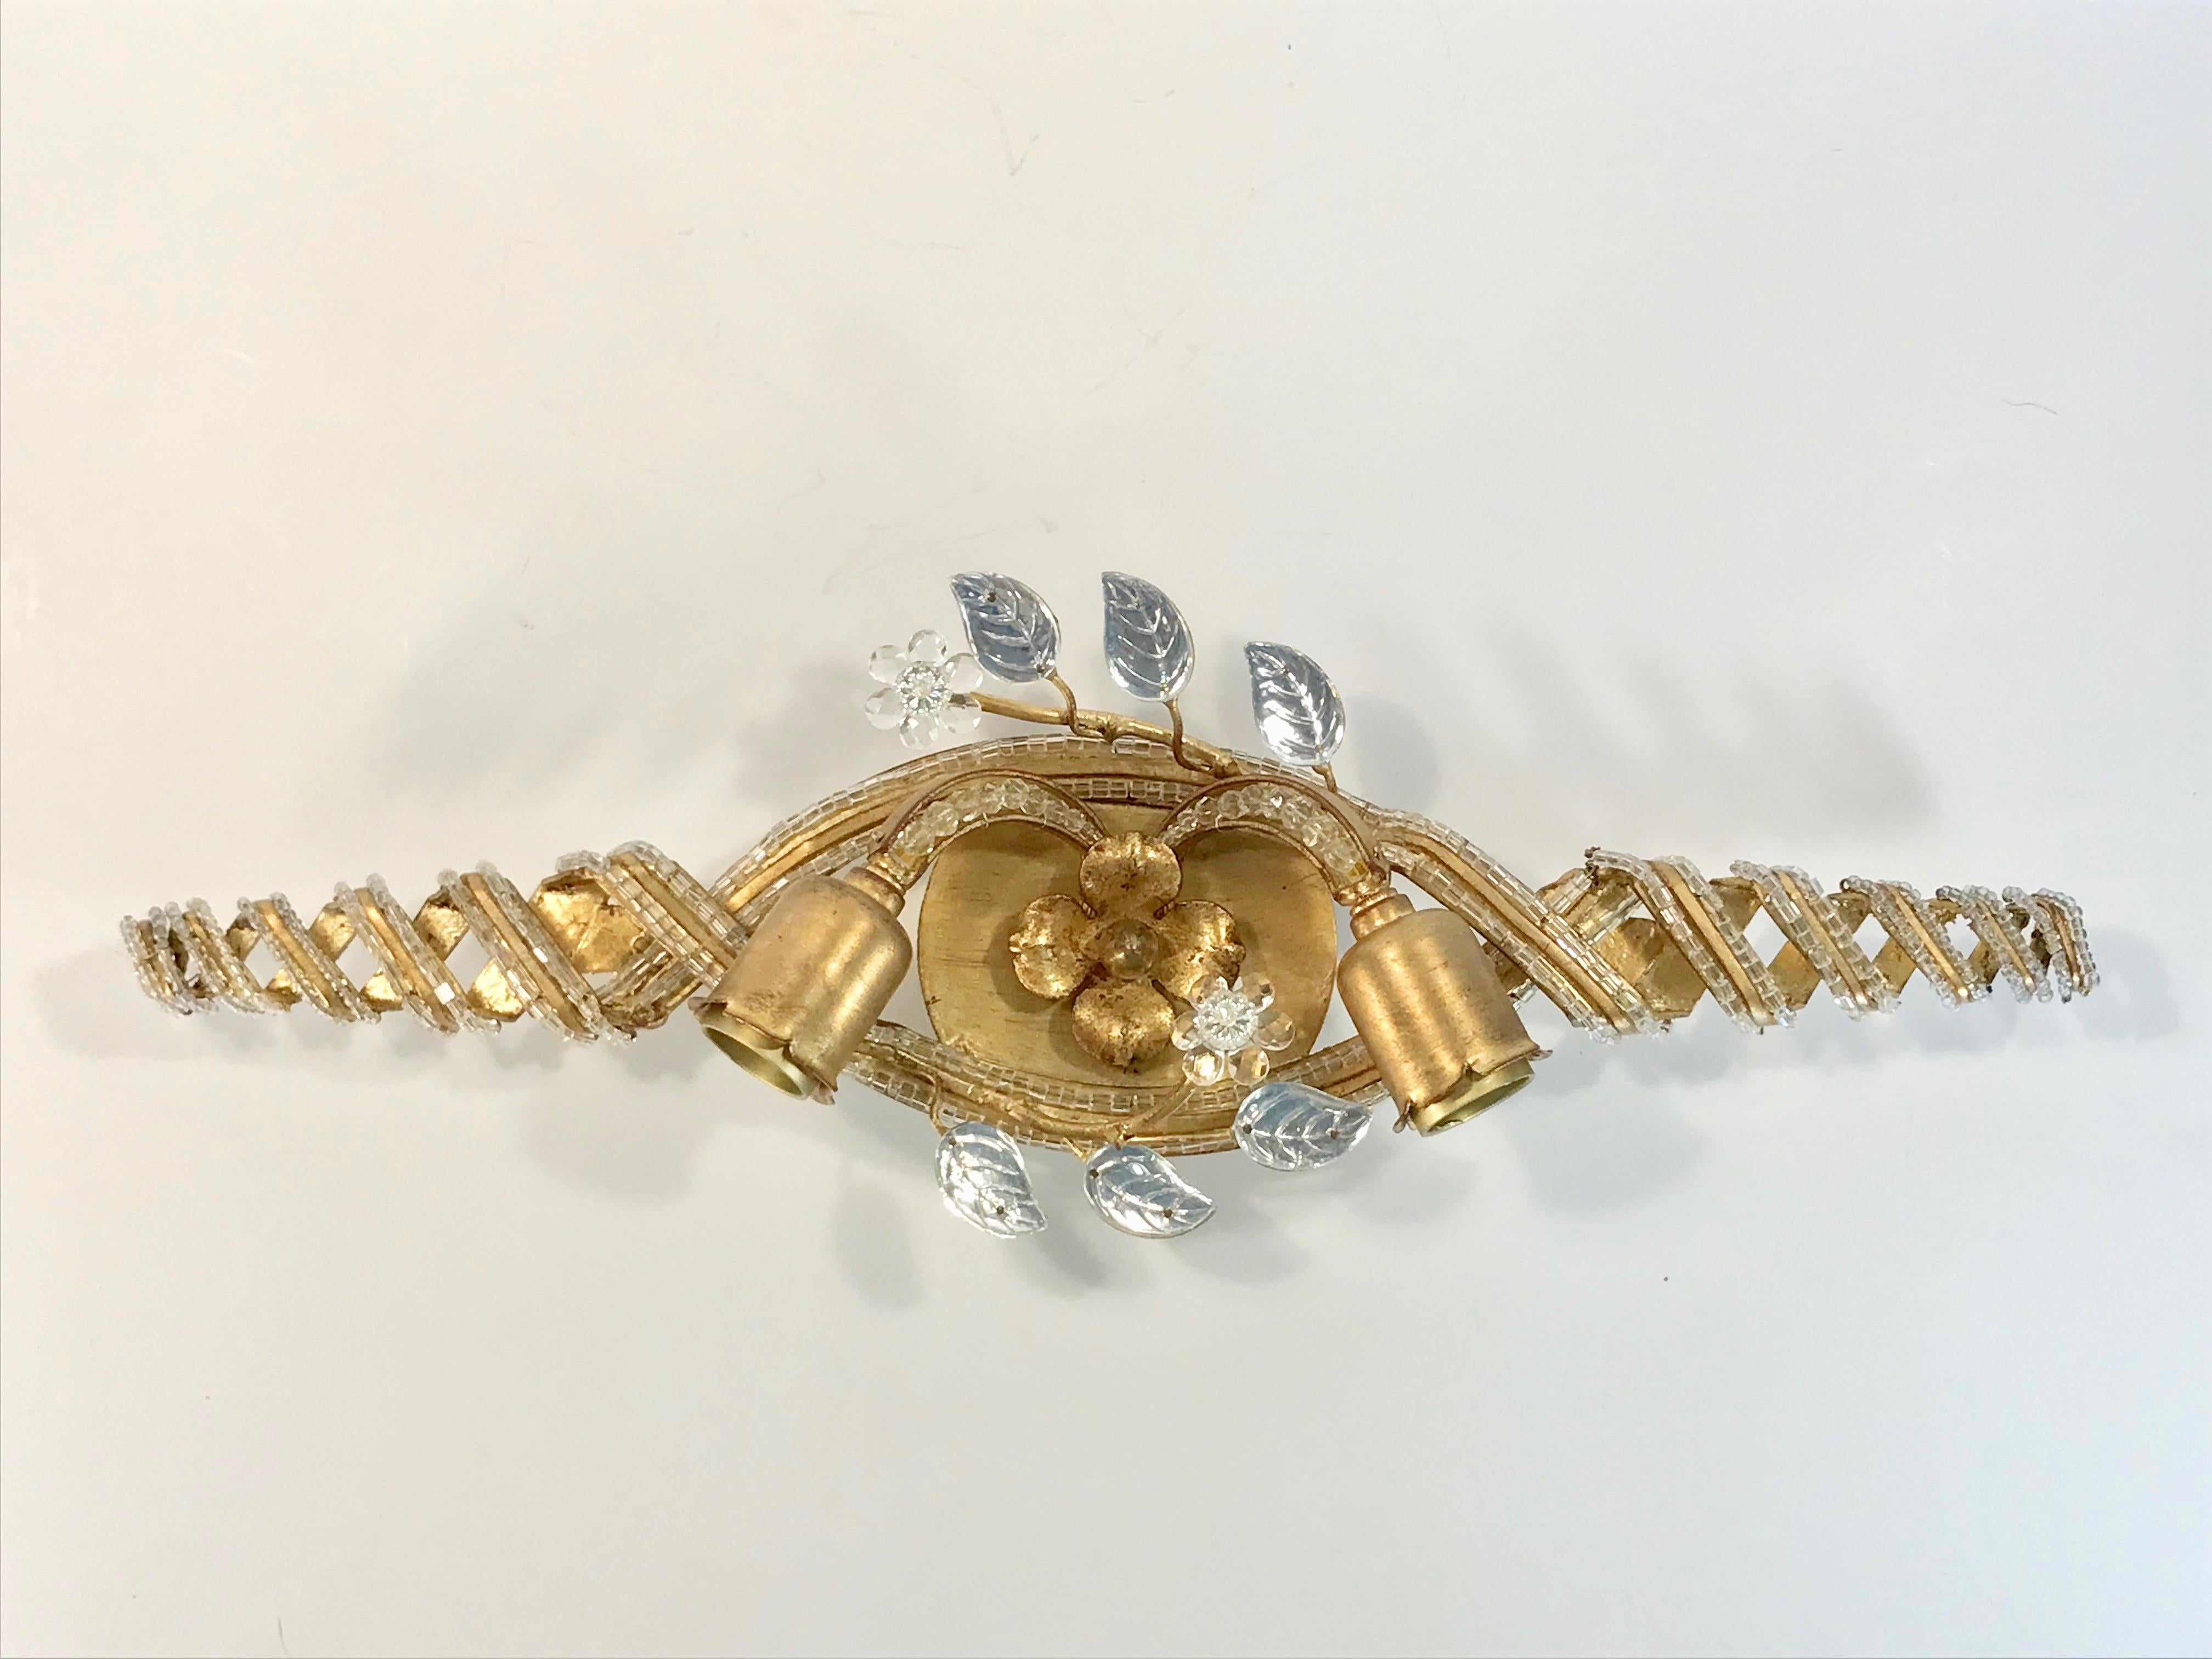 A single gilt metal and glass beaded wall sconce with decorative glass leaves and flowers. Perfect for over a bathroom mirror, this sconce uses two - A or Edison base bulbs and has been rewired for US installations. Retains original brass 